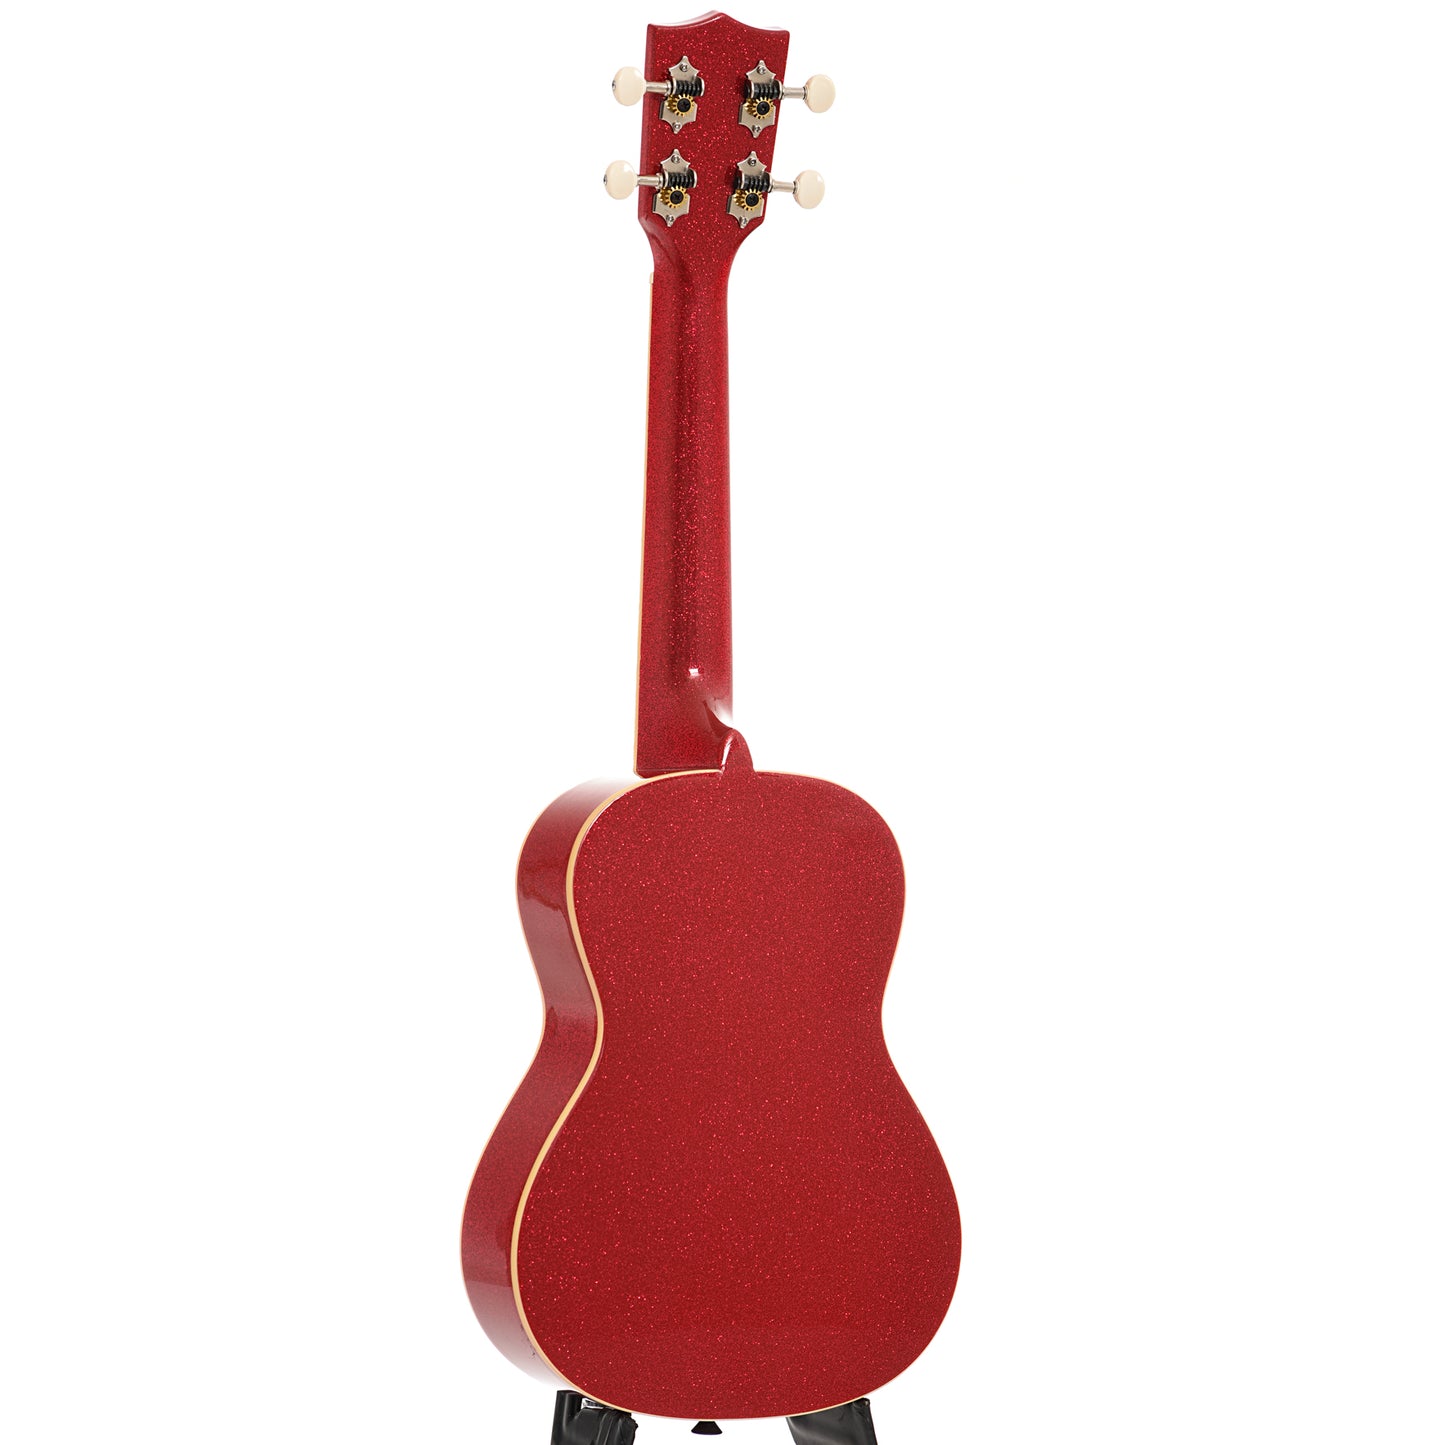 Full back and side of Kala Gloss Sparkle Concert Ukulele, Ritzy Red (recent)